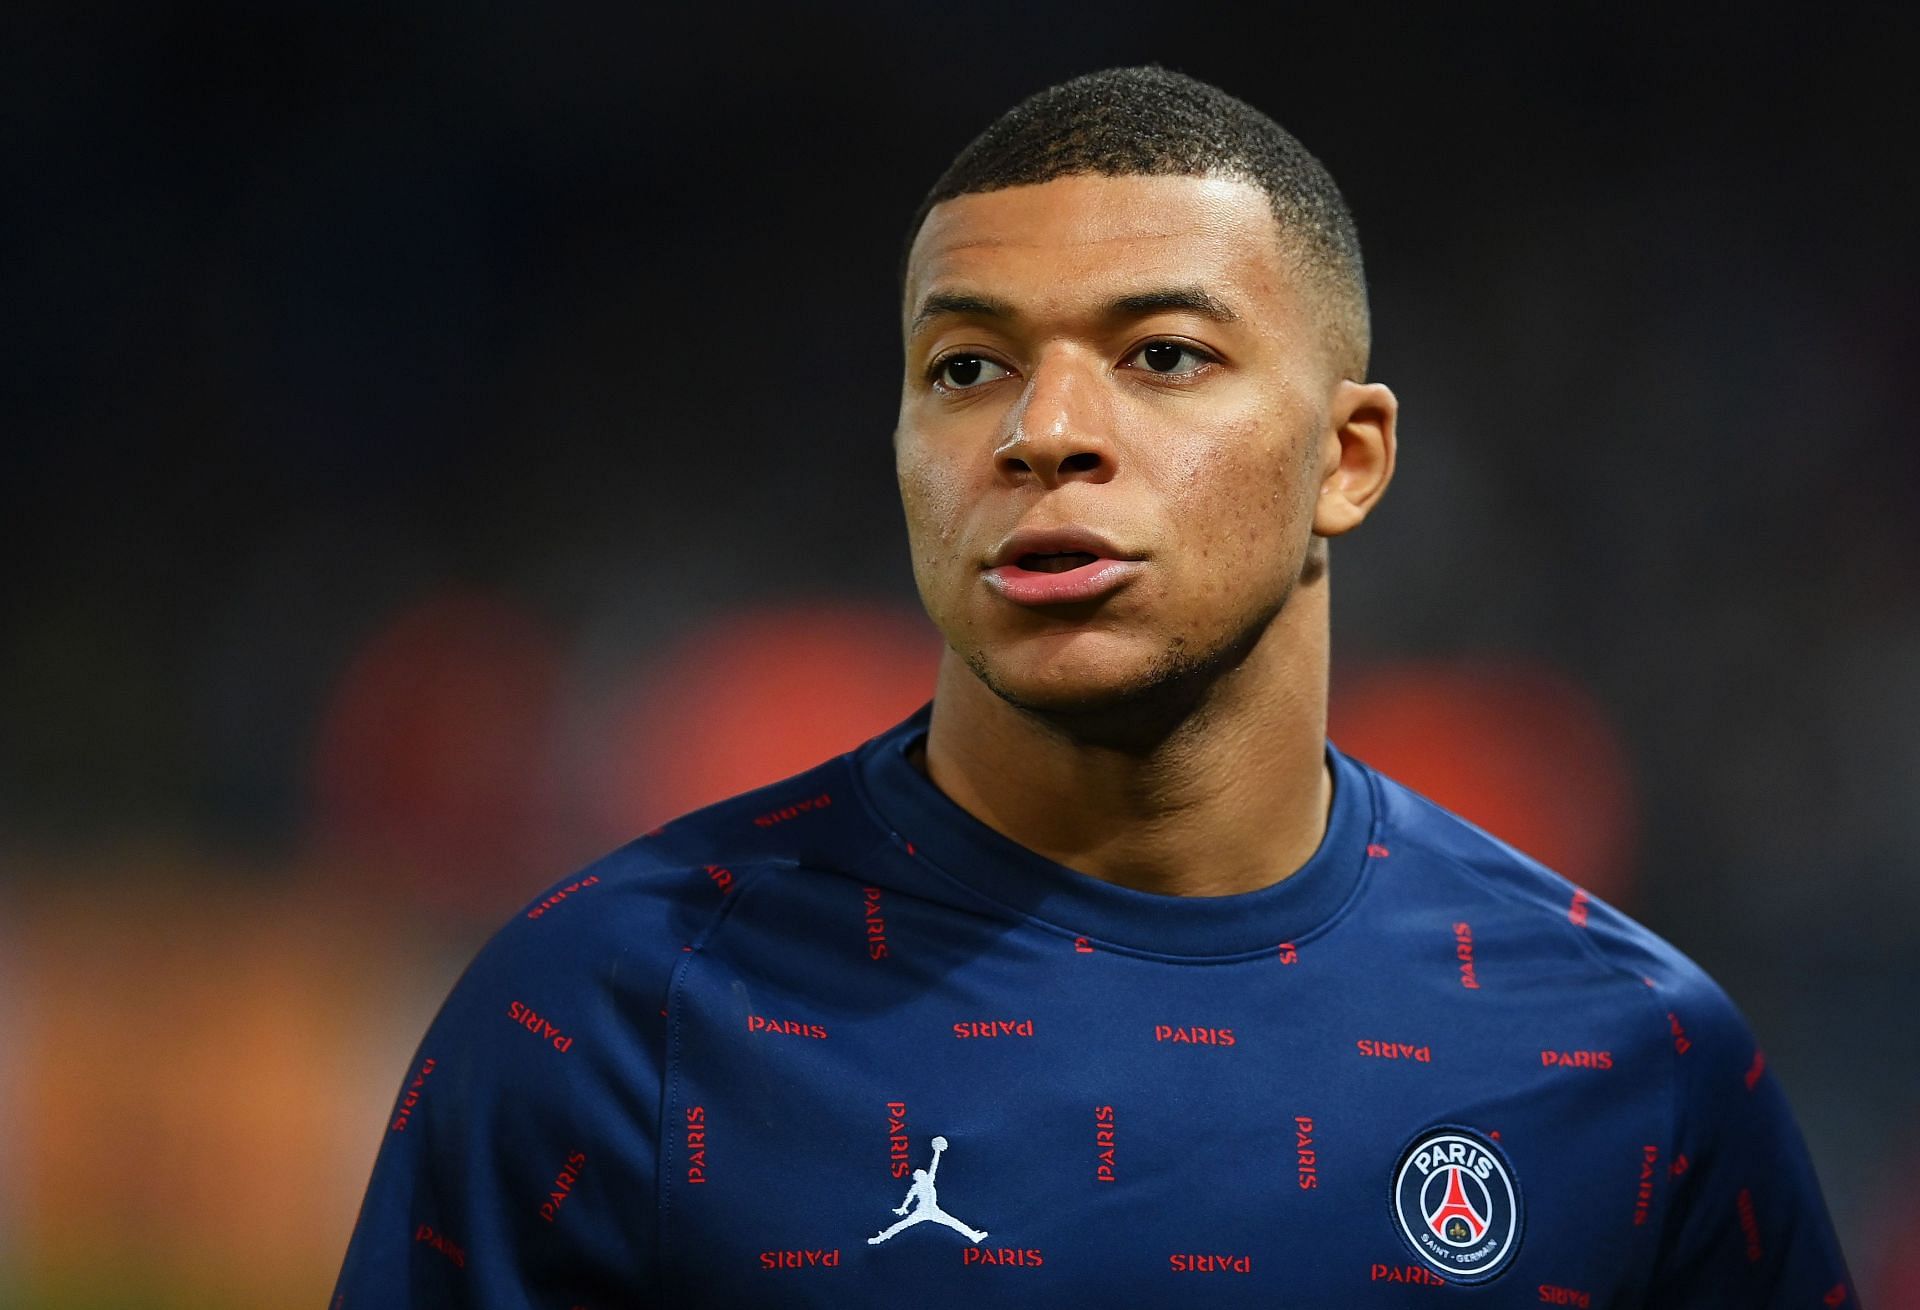 Mbappe is a global superstar already